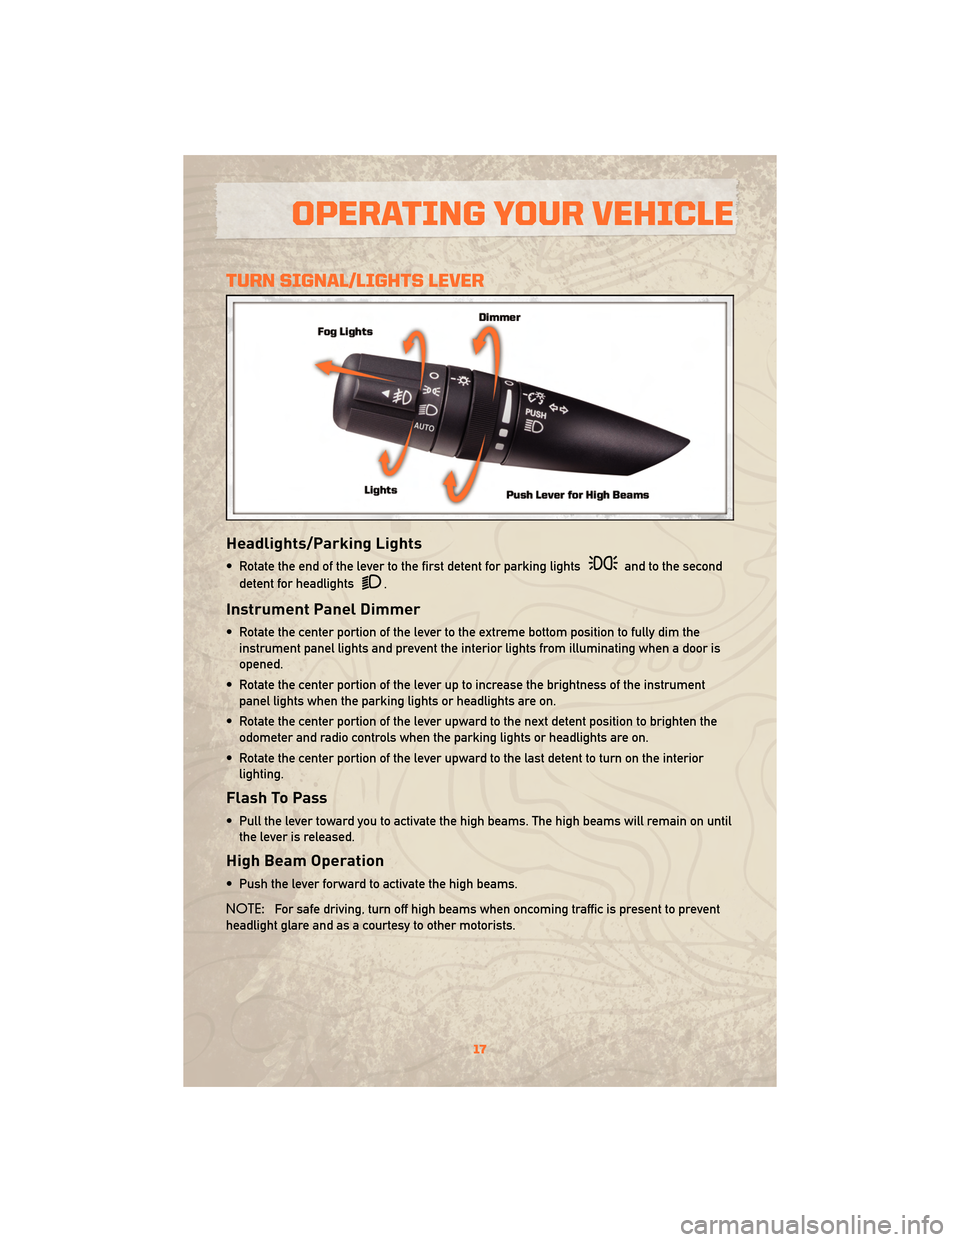 JEEP WRANGLER 2010 JK / 3.G User Guide TURN SIGNAL/LIGHTS LEVER
Headlights/Parking Lights
• Rotate the end of the lever to the first detent for parking lightsand to the second
detent for headlights
.
Instrument Panel Dimmer
• Rotate th